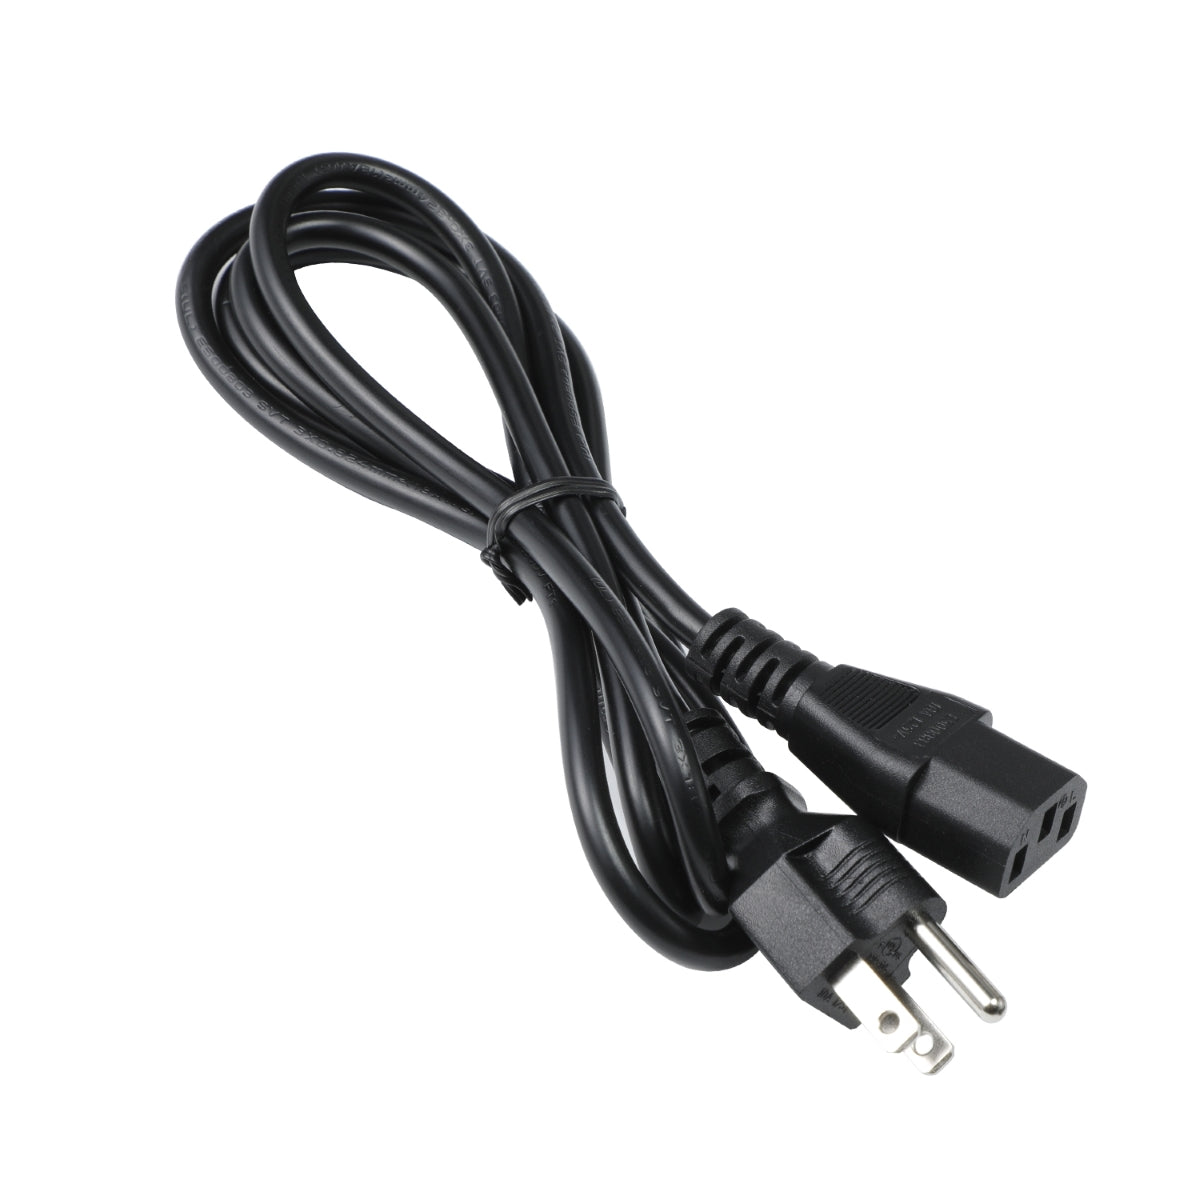 Power Cable for Philips 241B8QJEB Monitor.